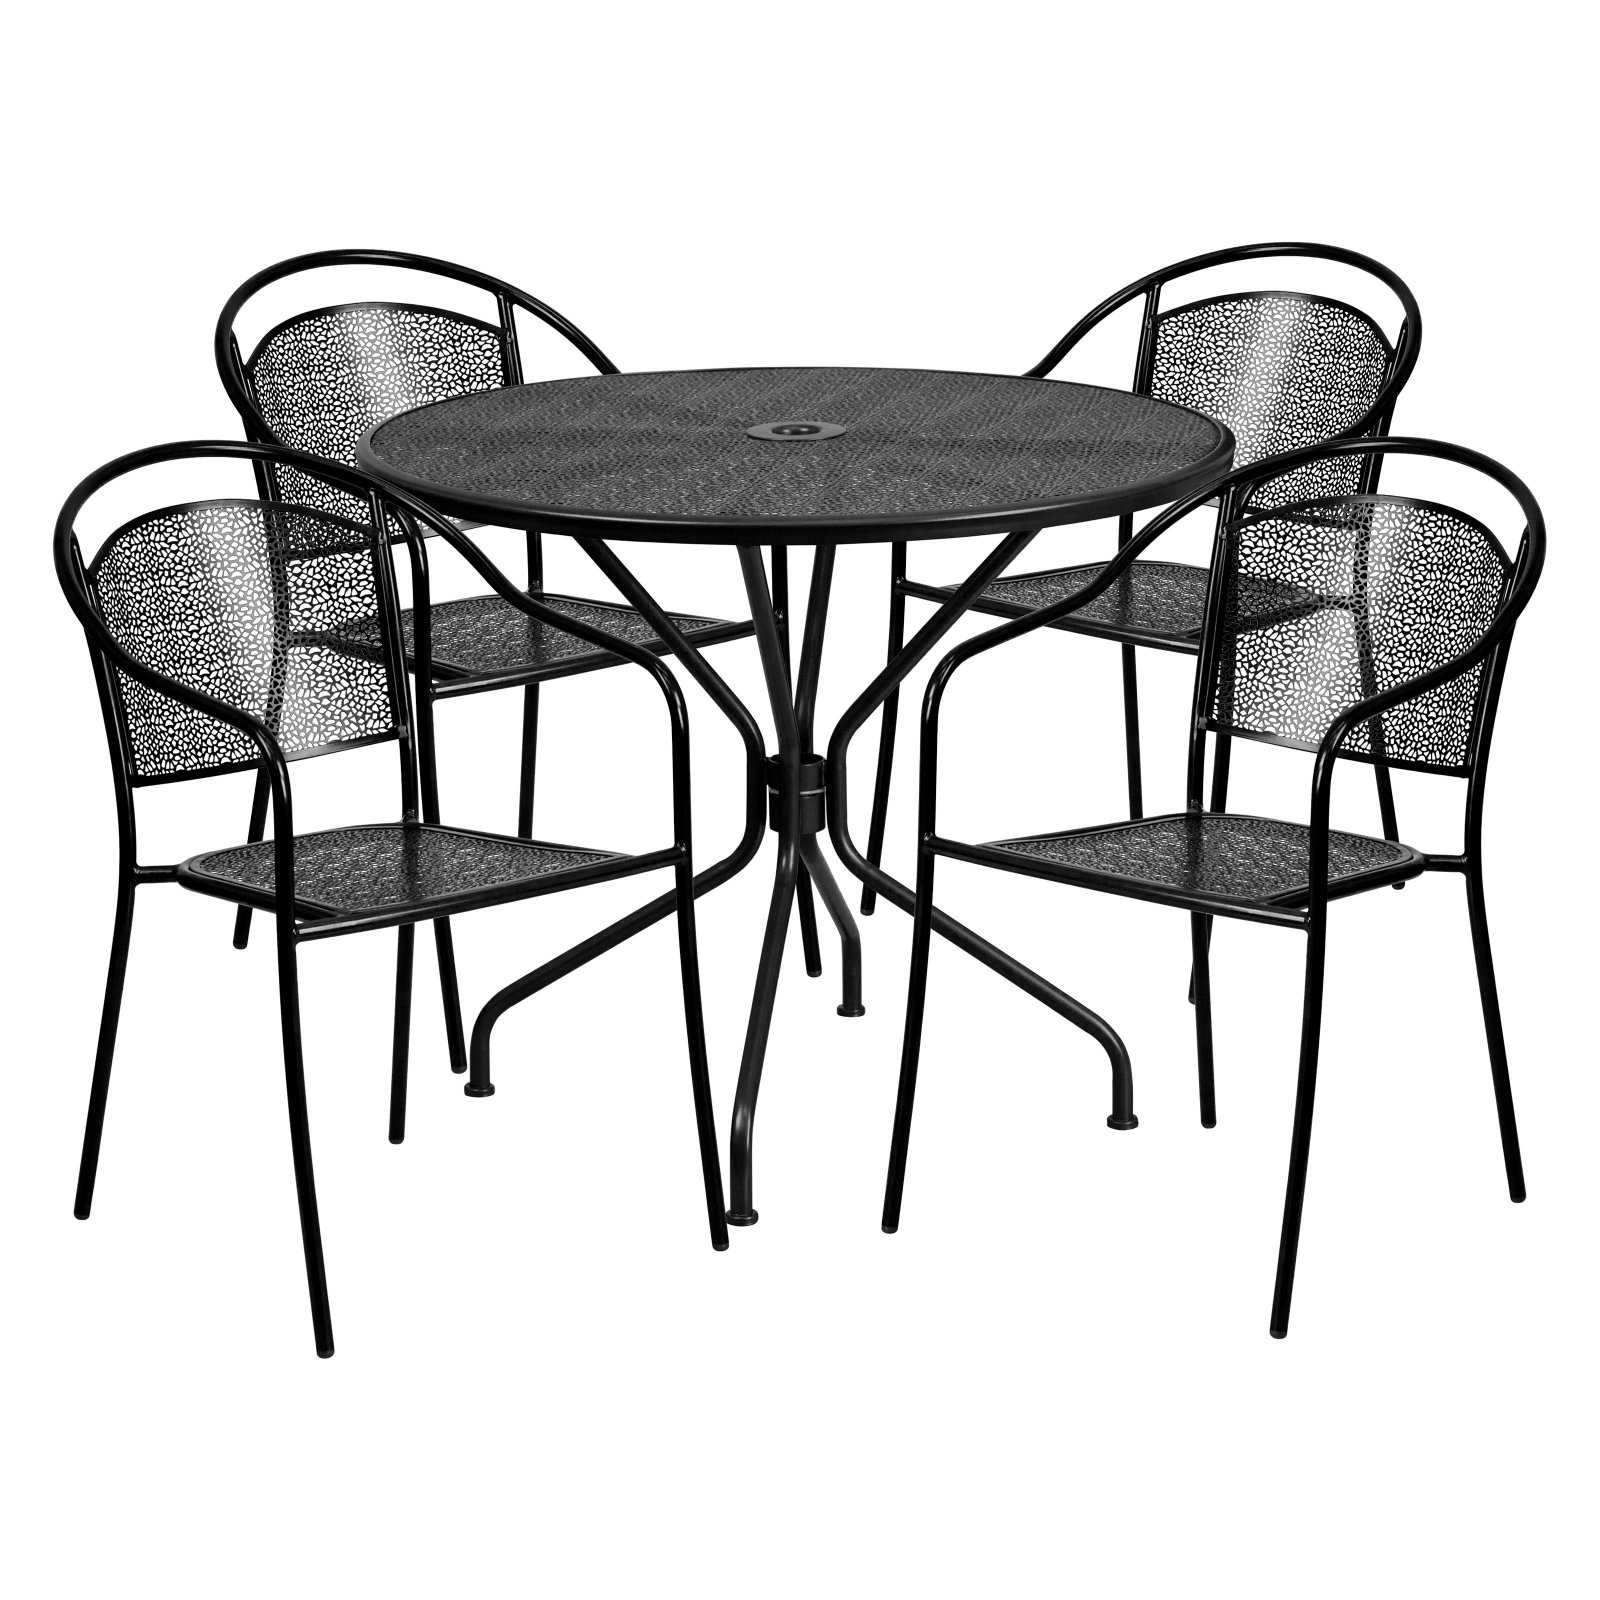 Flash Furniture Commercial Grade 35.25" Round Black Indoor-Outdoor Steel Patio Table Set with 4 Round Back Chairs - image 1 of 9